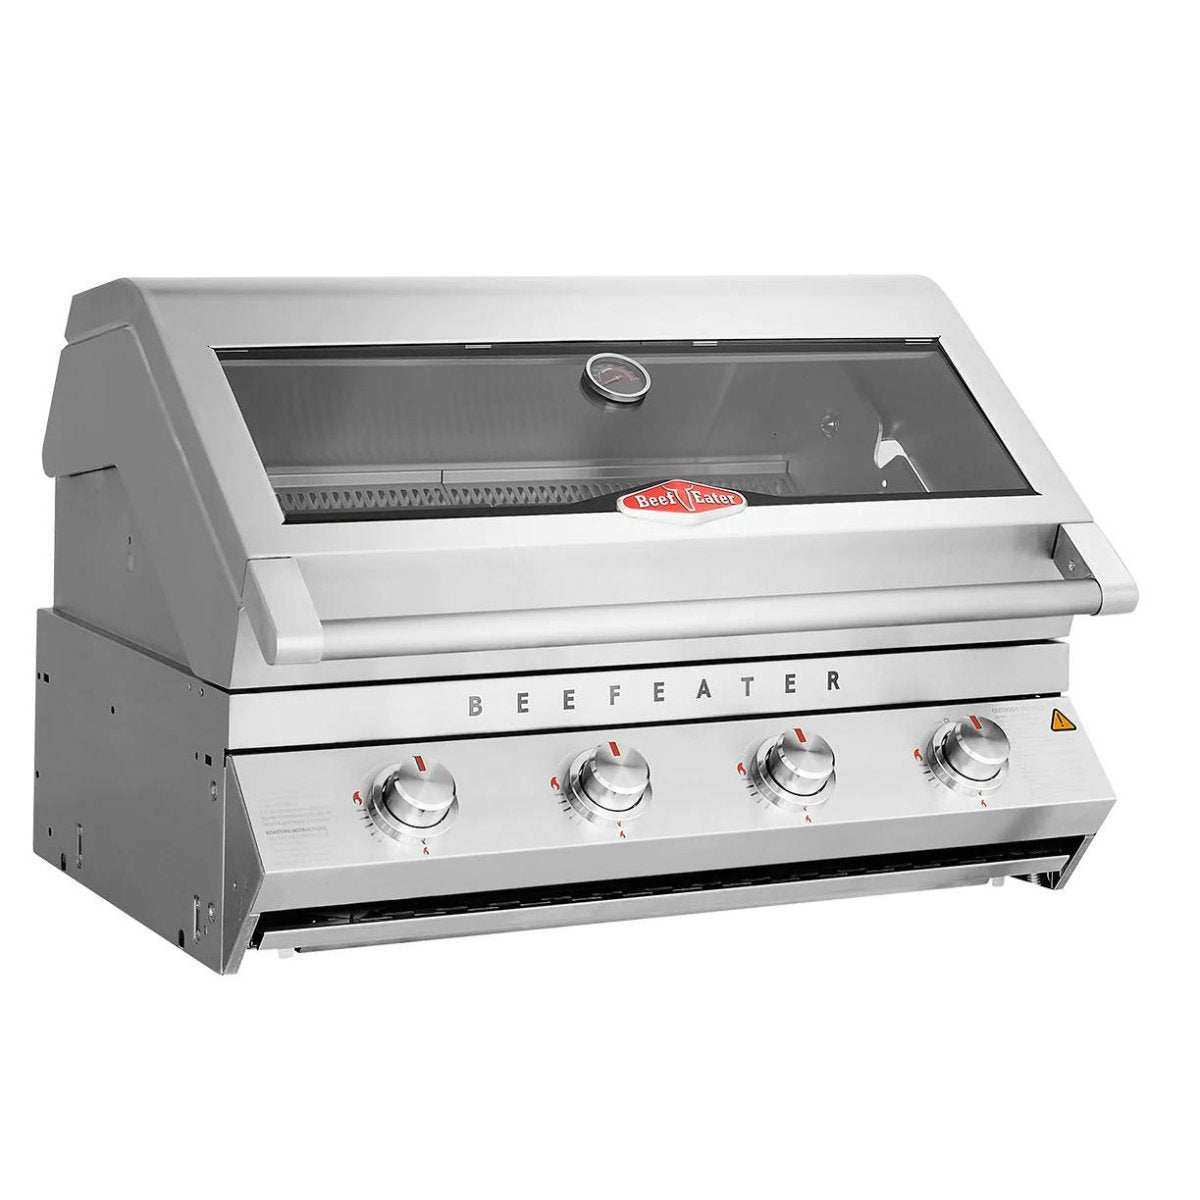 Beefeater 7000 Series Classic 4 Burner Built-In Grill - Kitchen In The Garden